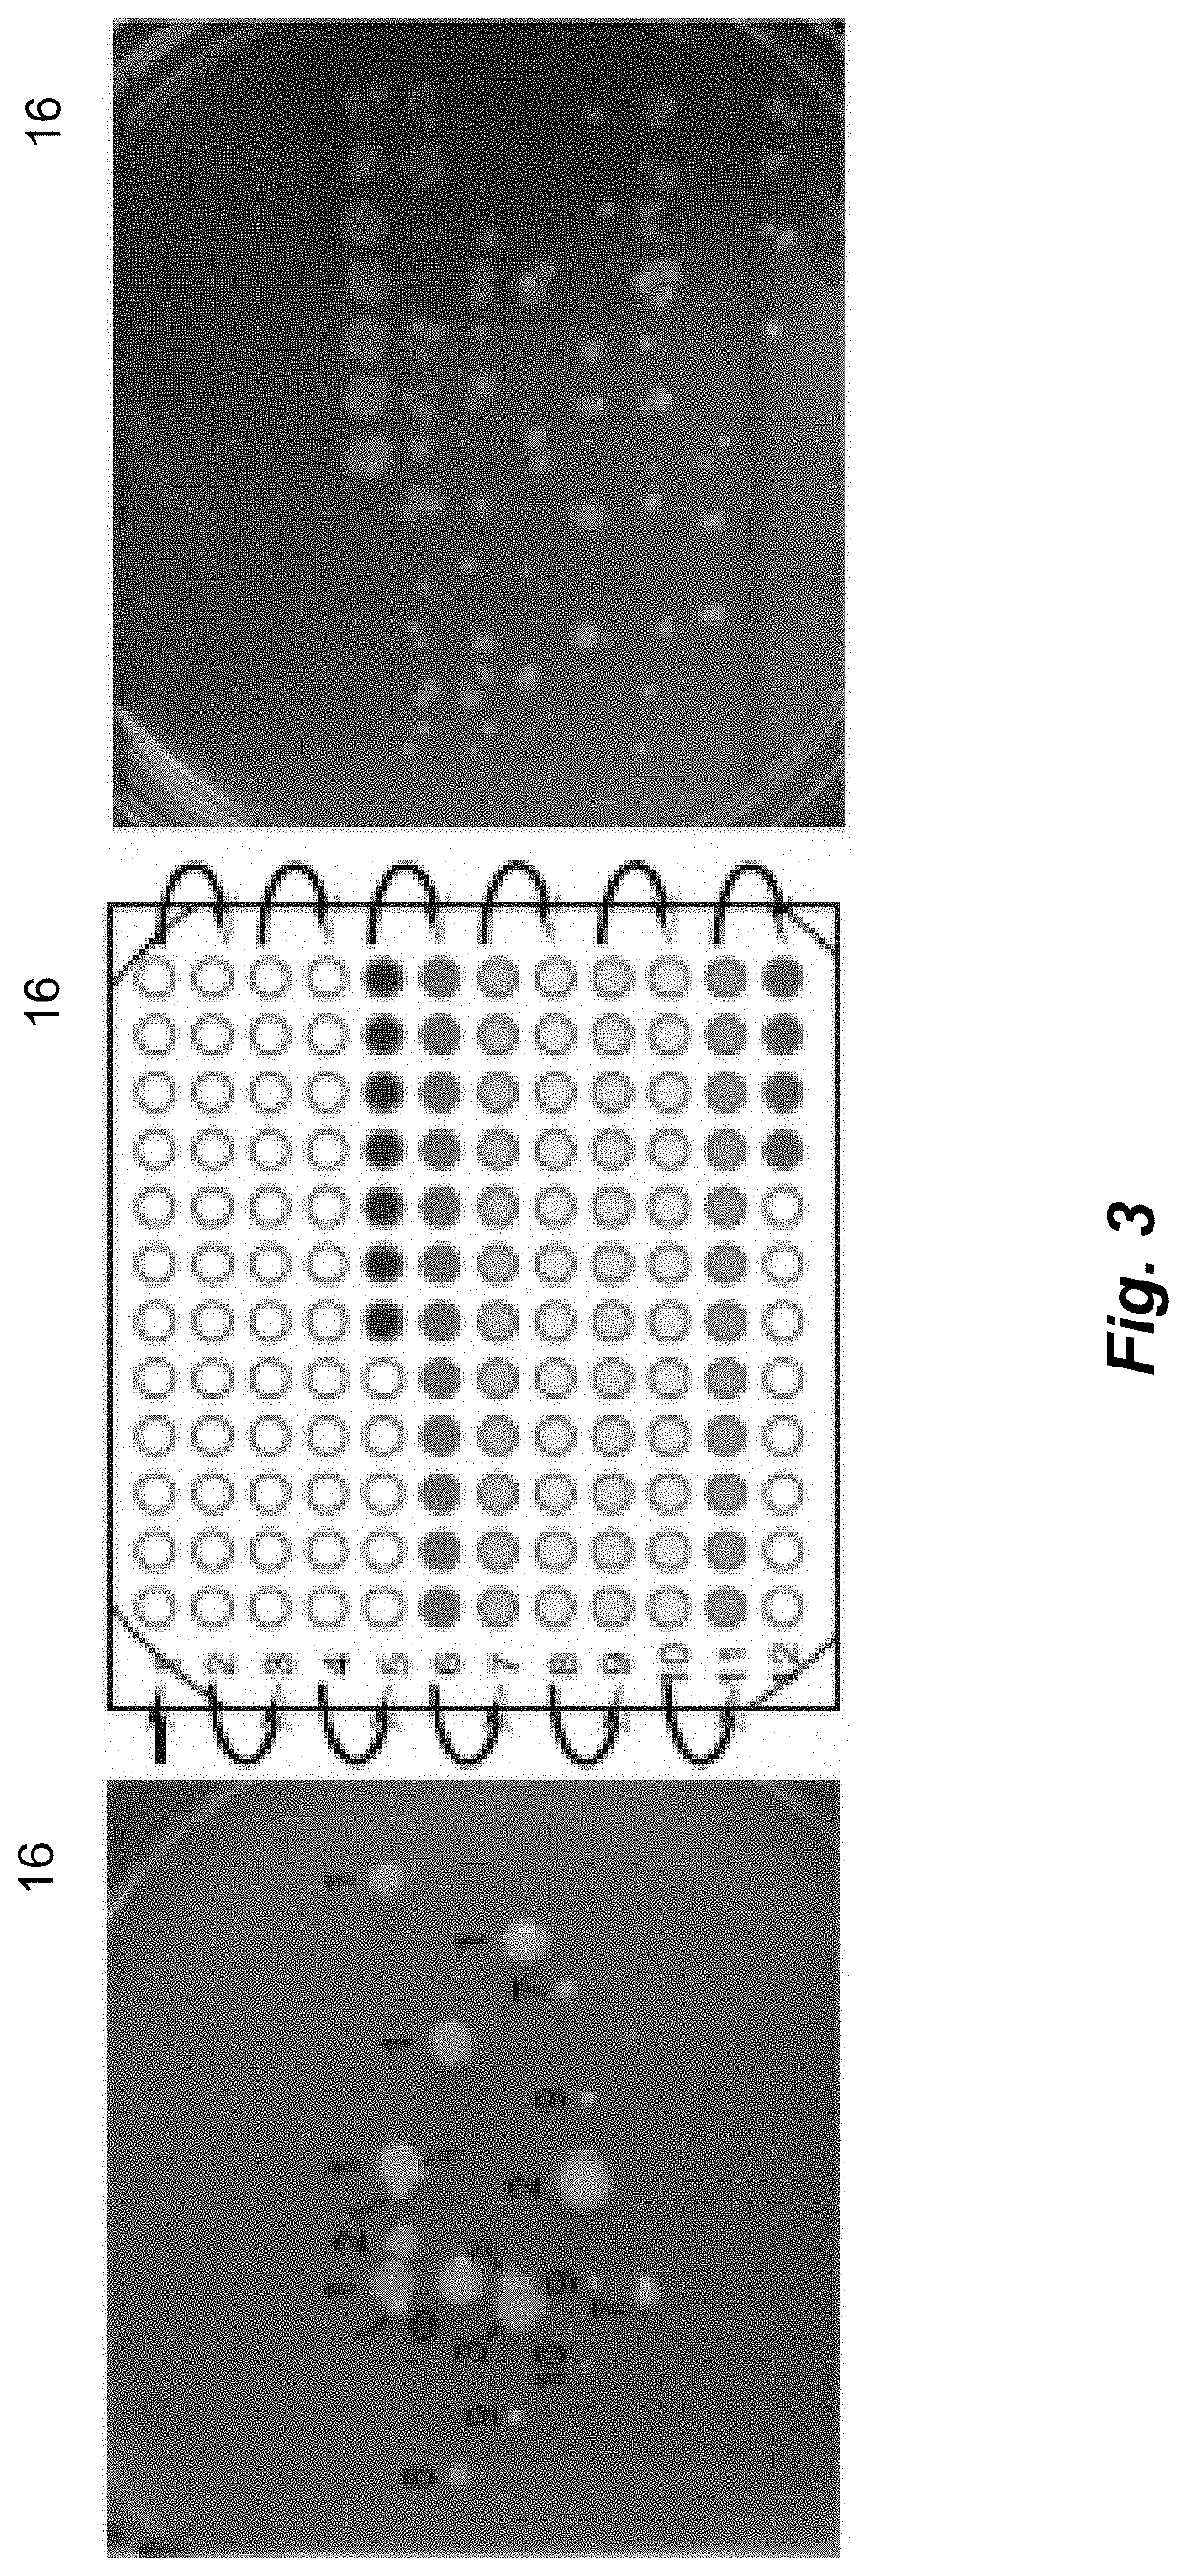 Systems and method for electrophoretic fractionation of the microbiome